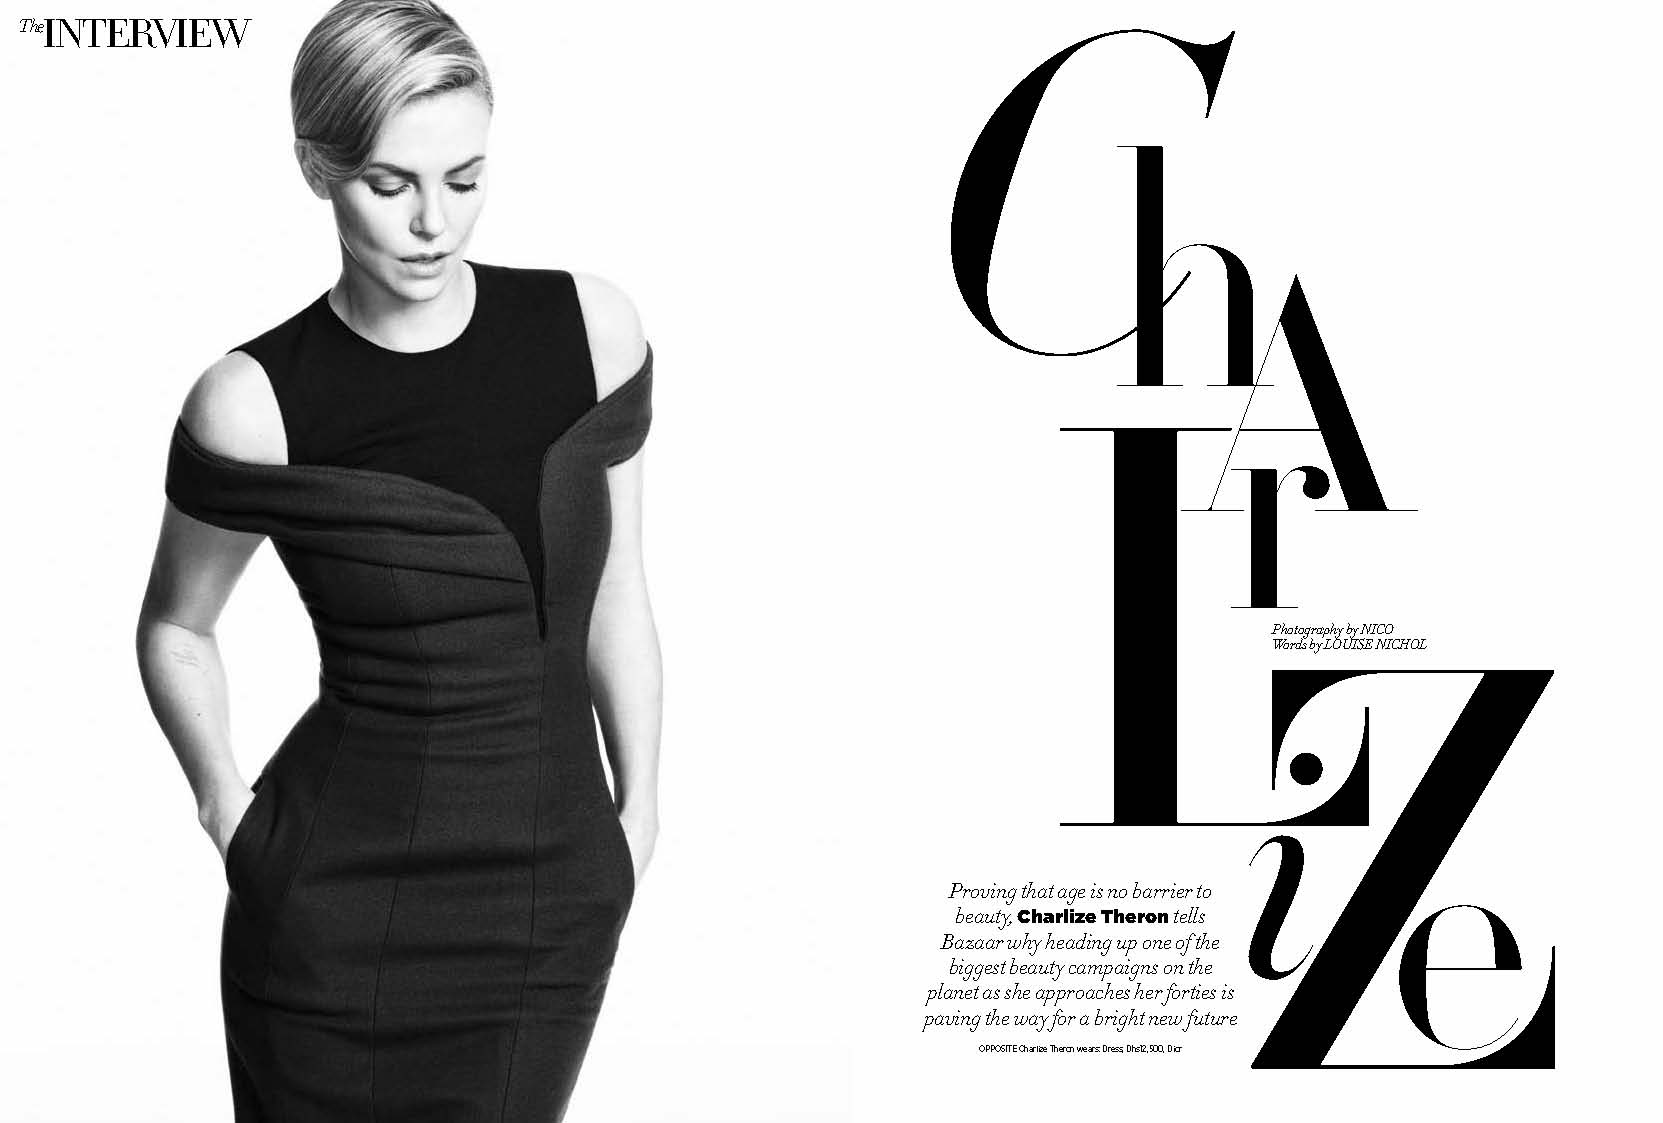 Charlize Theron, October 2014